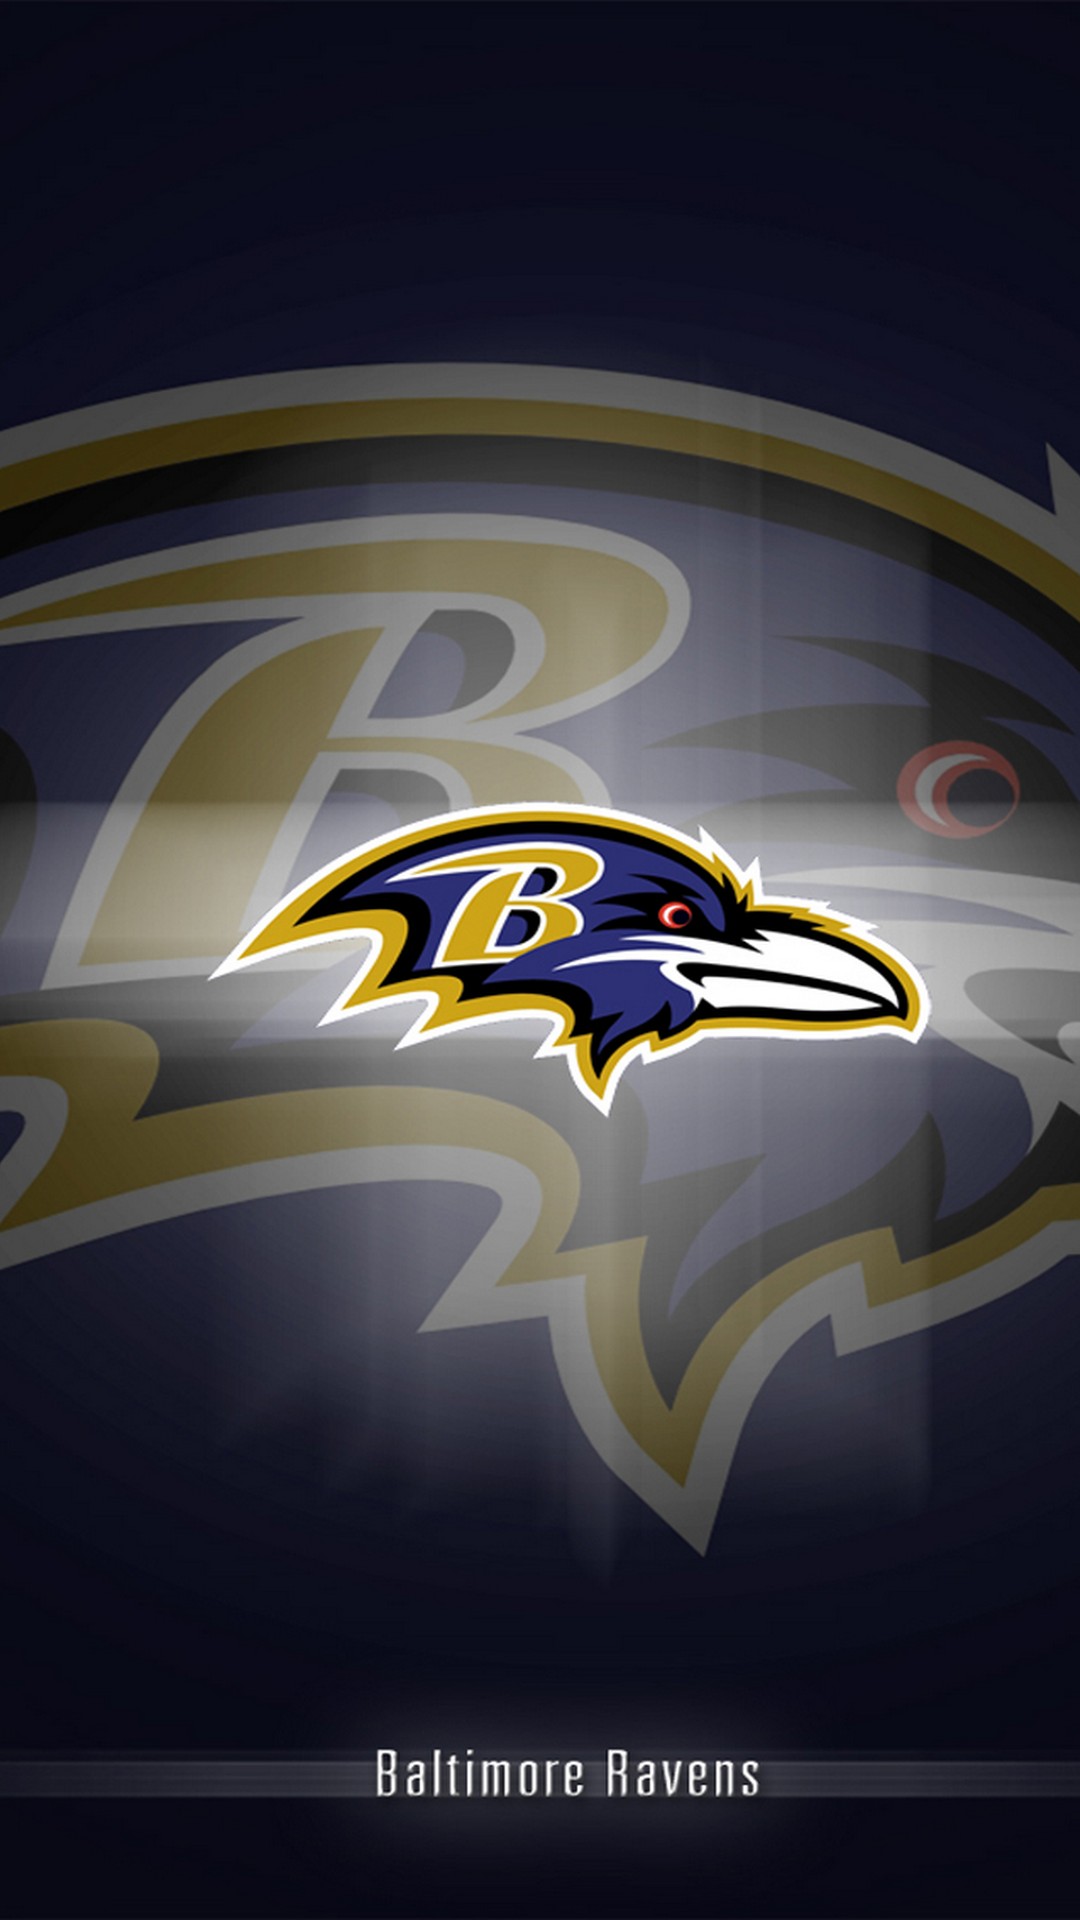 Baltimore Ravens iPhone Wallpaper High Quality with high-resolution 1080x1920 pixel. Donwload and set as wallpaper for your iPhone X, iPhone XS home screen backgrounds, XS Max, XR, iPhone8 lock screen wallpaper, iPhone 7, 6, SE and other mobile devices